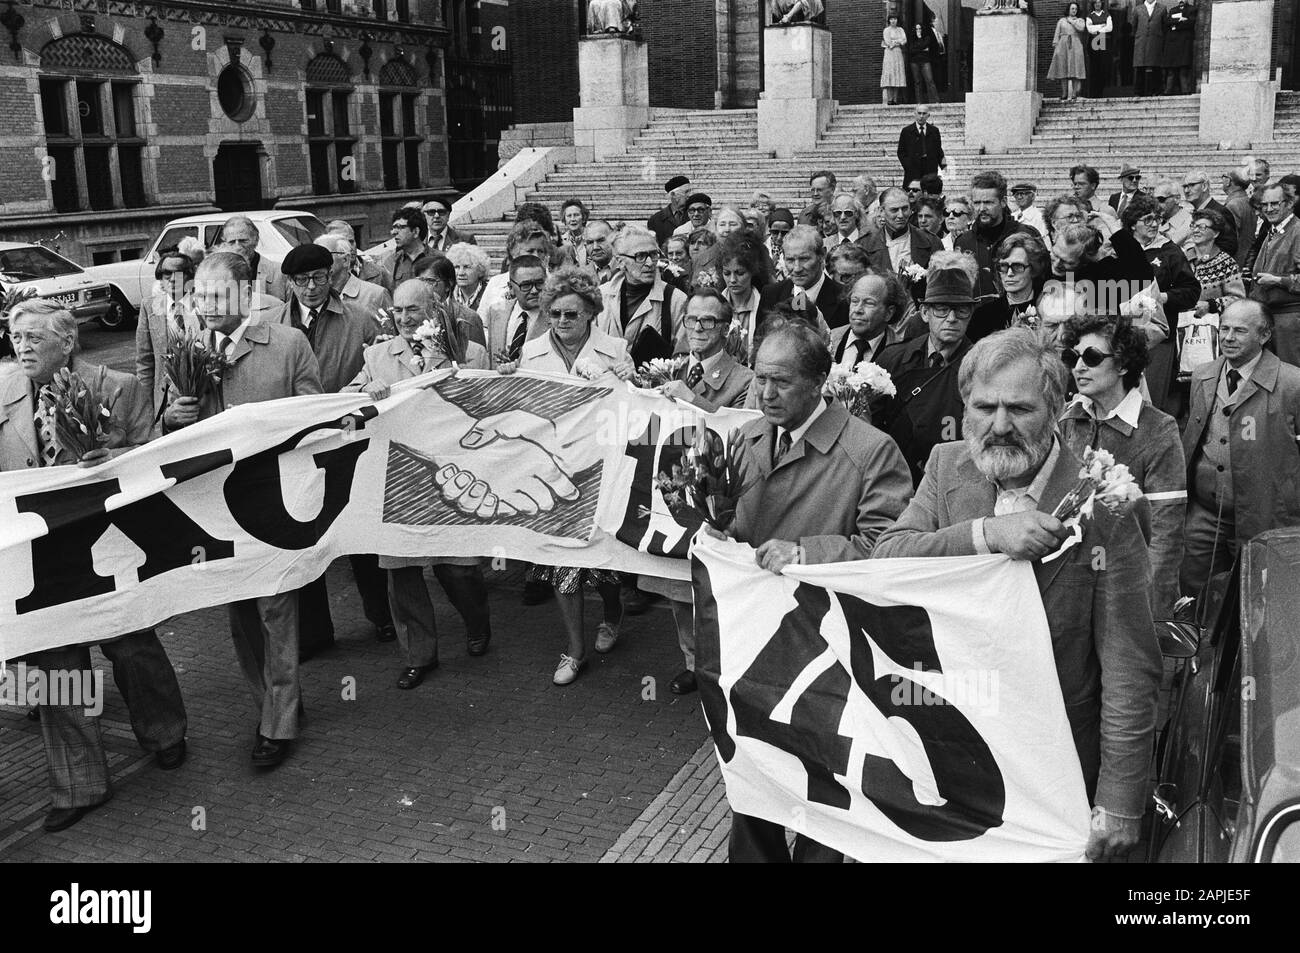 Demonstration in front of the building of the Supreme Court at the ruling on the prosecution of the war criminal Pieter Menten Description: Protesters with banners; a.o. LKG 1940-1945 (Landaal Kontakt Groep Resistance pensioners) Date: 22 May 1979 Location: The Hague, Zuid-Holland Keywords: demonstrations, war crimes, courts, justice, banners Institution name: Hoge Raad der Nederlanden Stock Photo